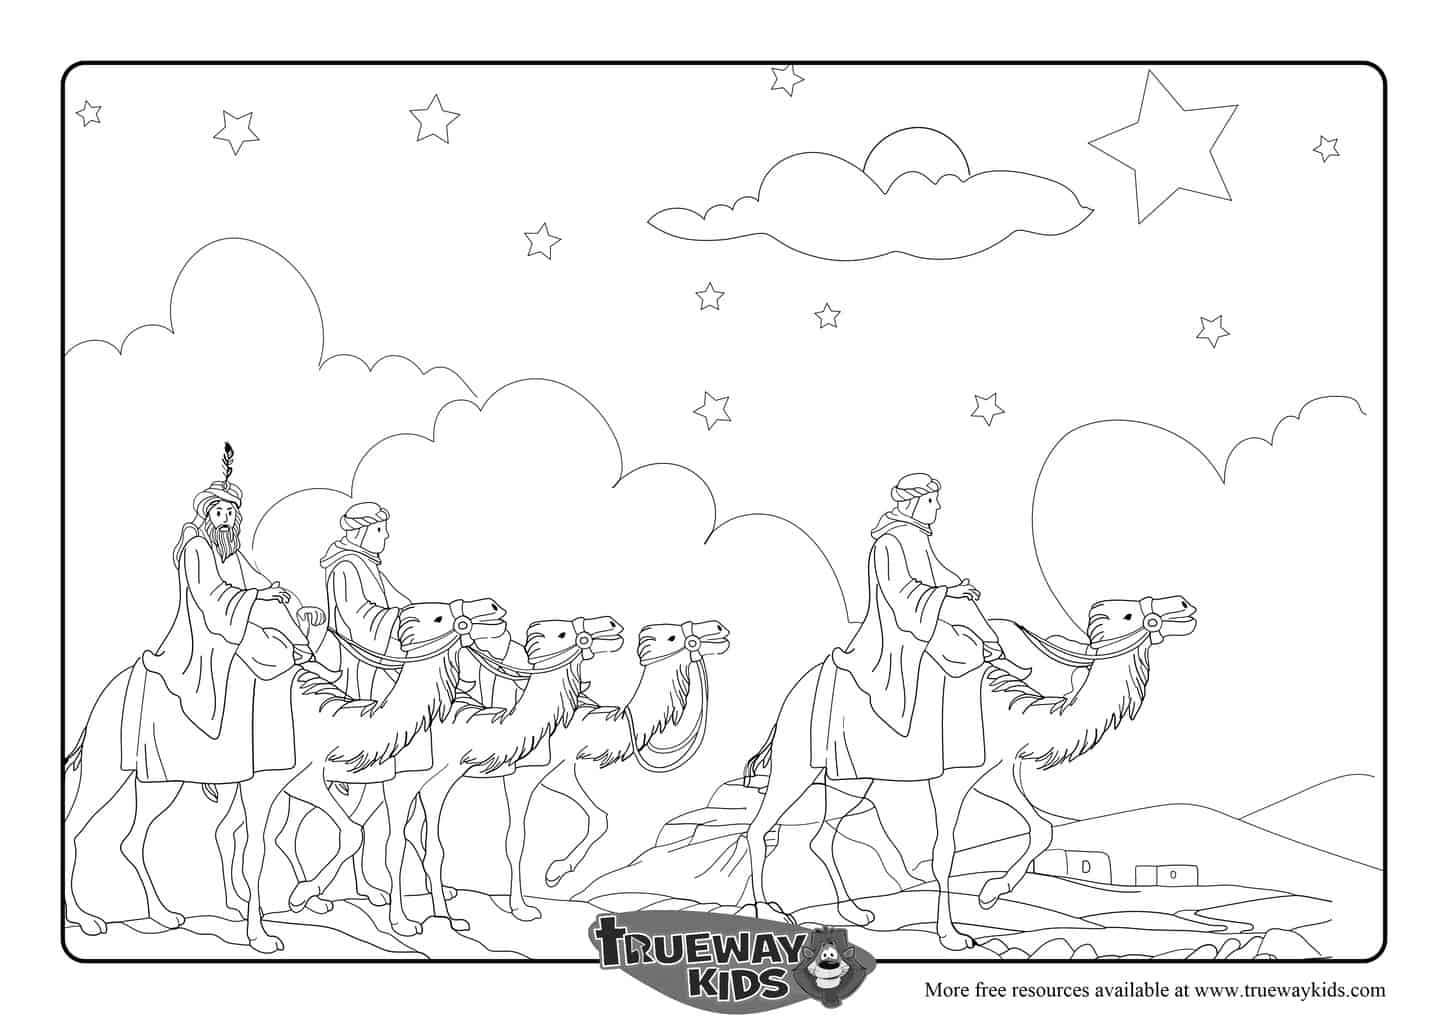 Wise men follow the star - Matthew 2:1-12 - Free colouring page ...